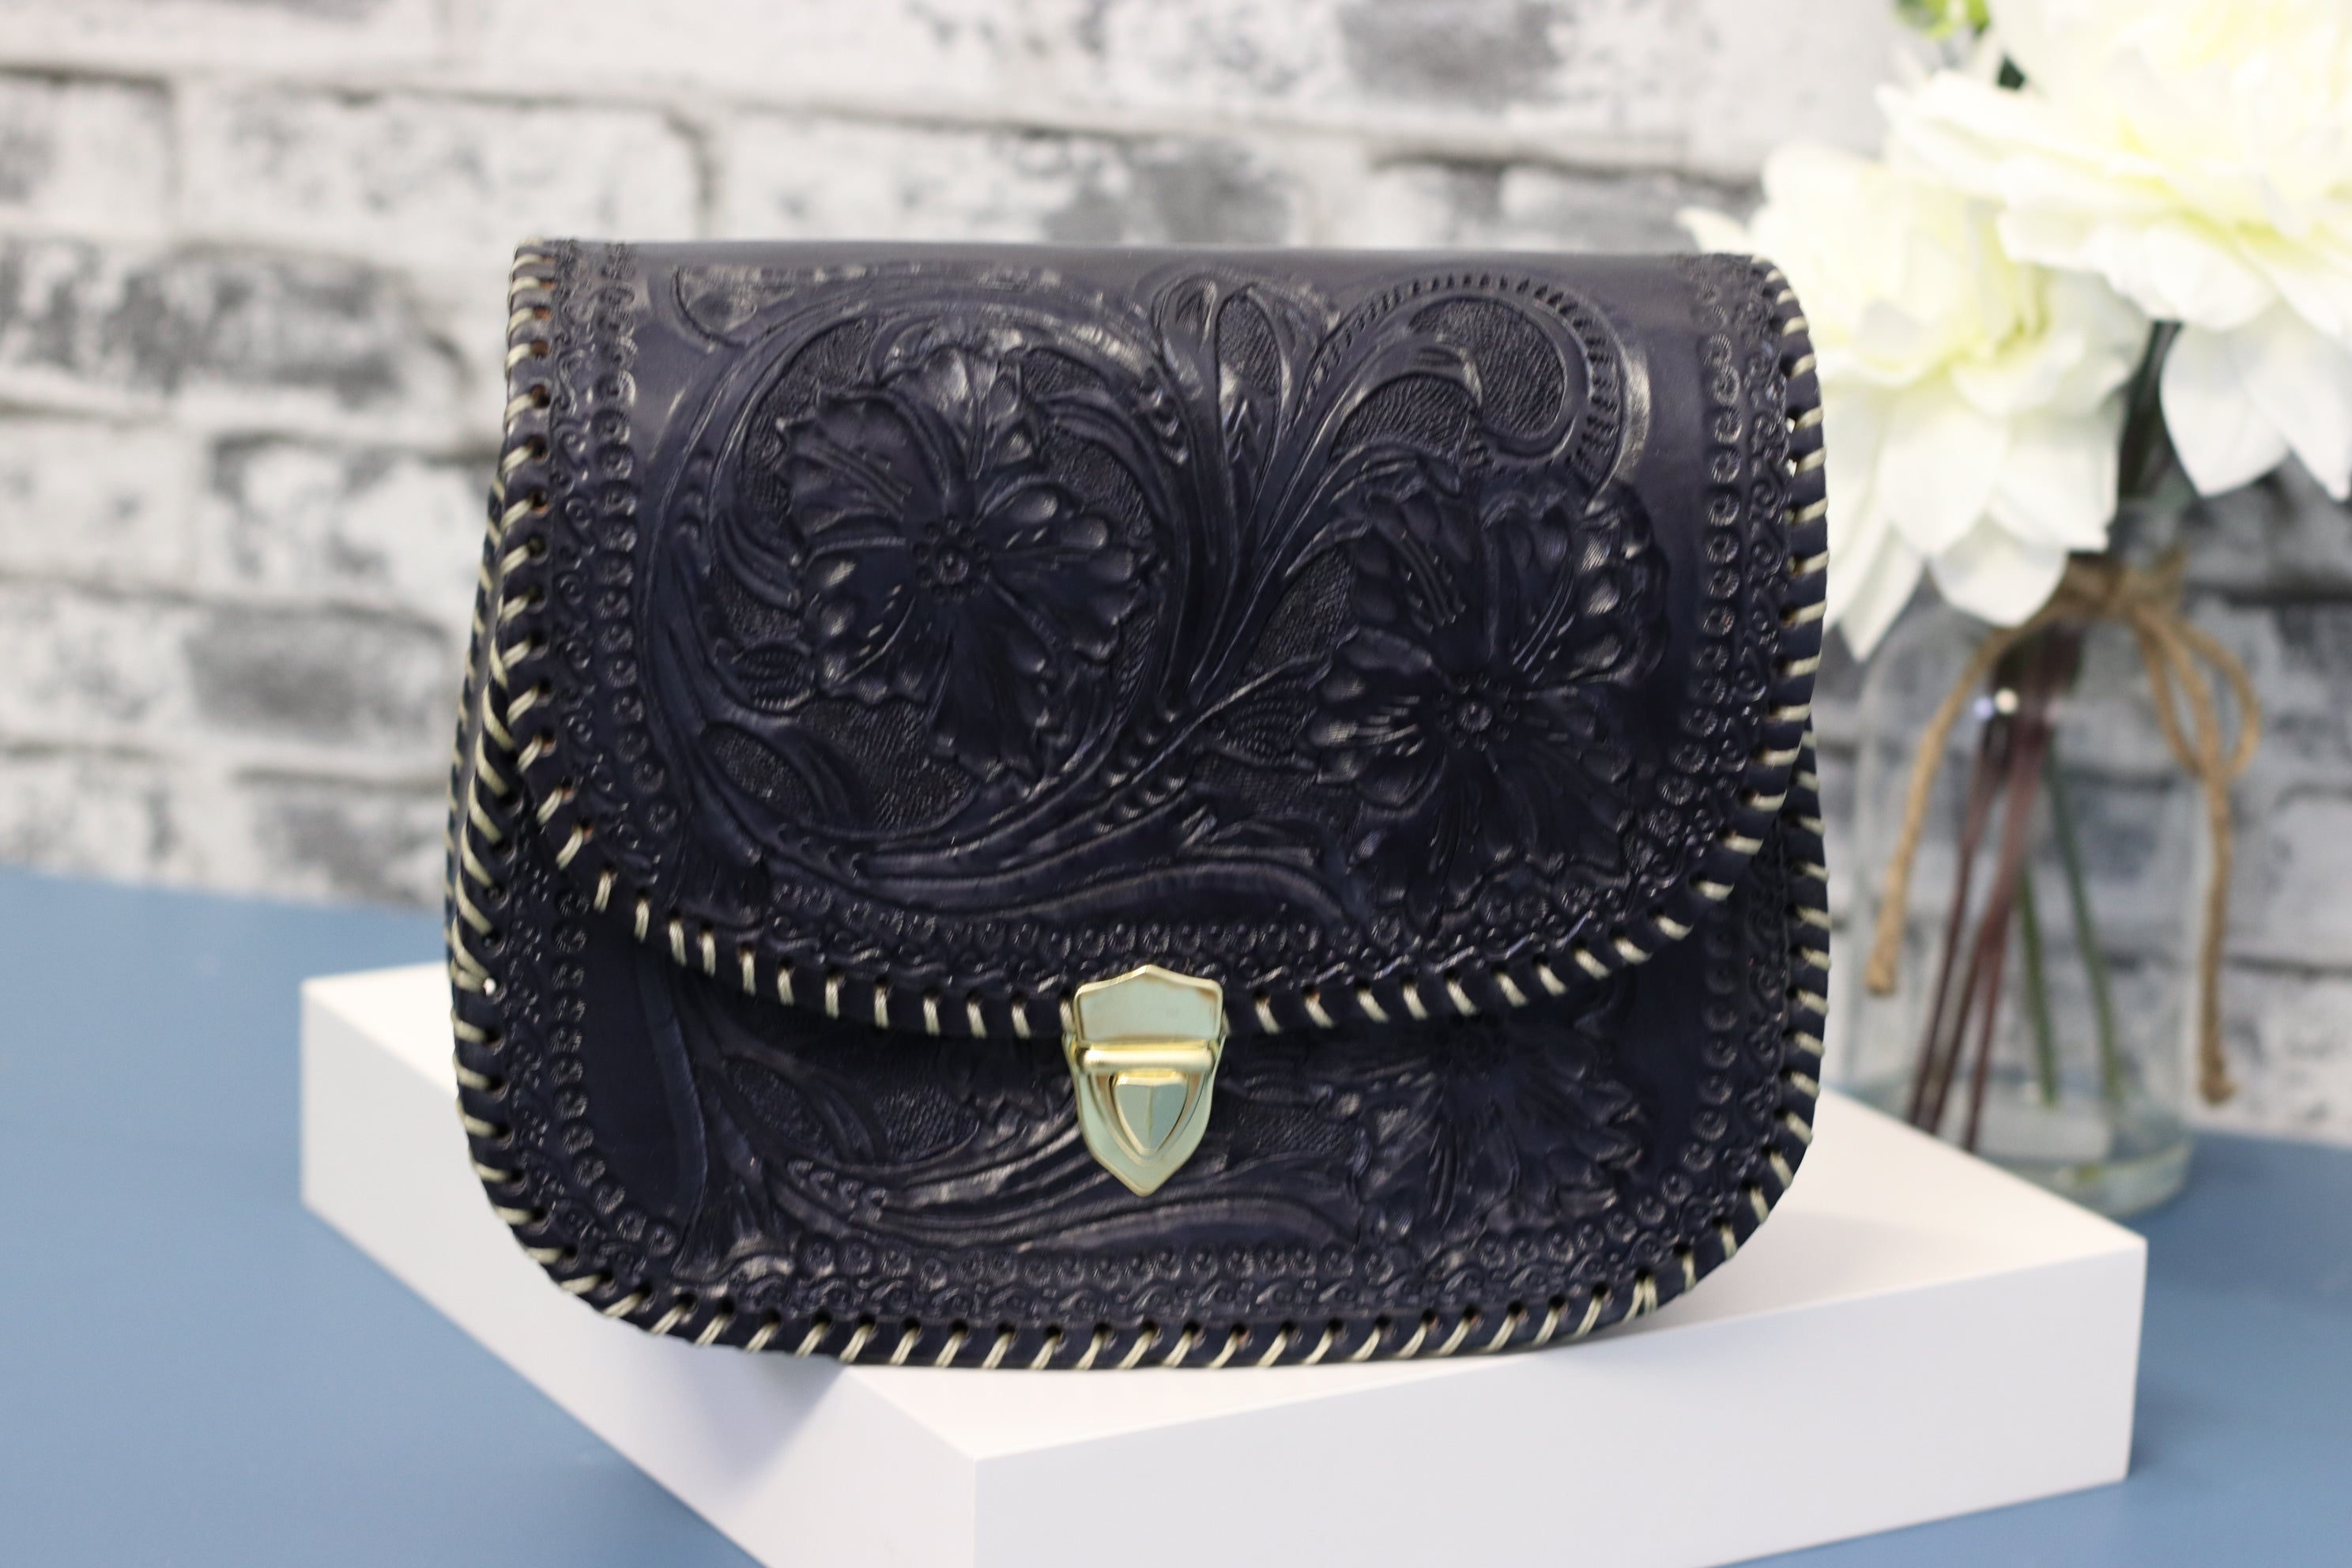 Blue leather clutch, hand-tooled leather with gold clasp closure. Clutch Handbag. Made by artisans in Central Mexico, shipping from the USA. Handmade. Buy now at www.felipeandgrace.com. 